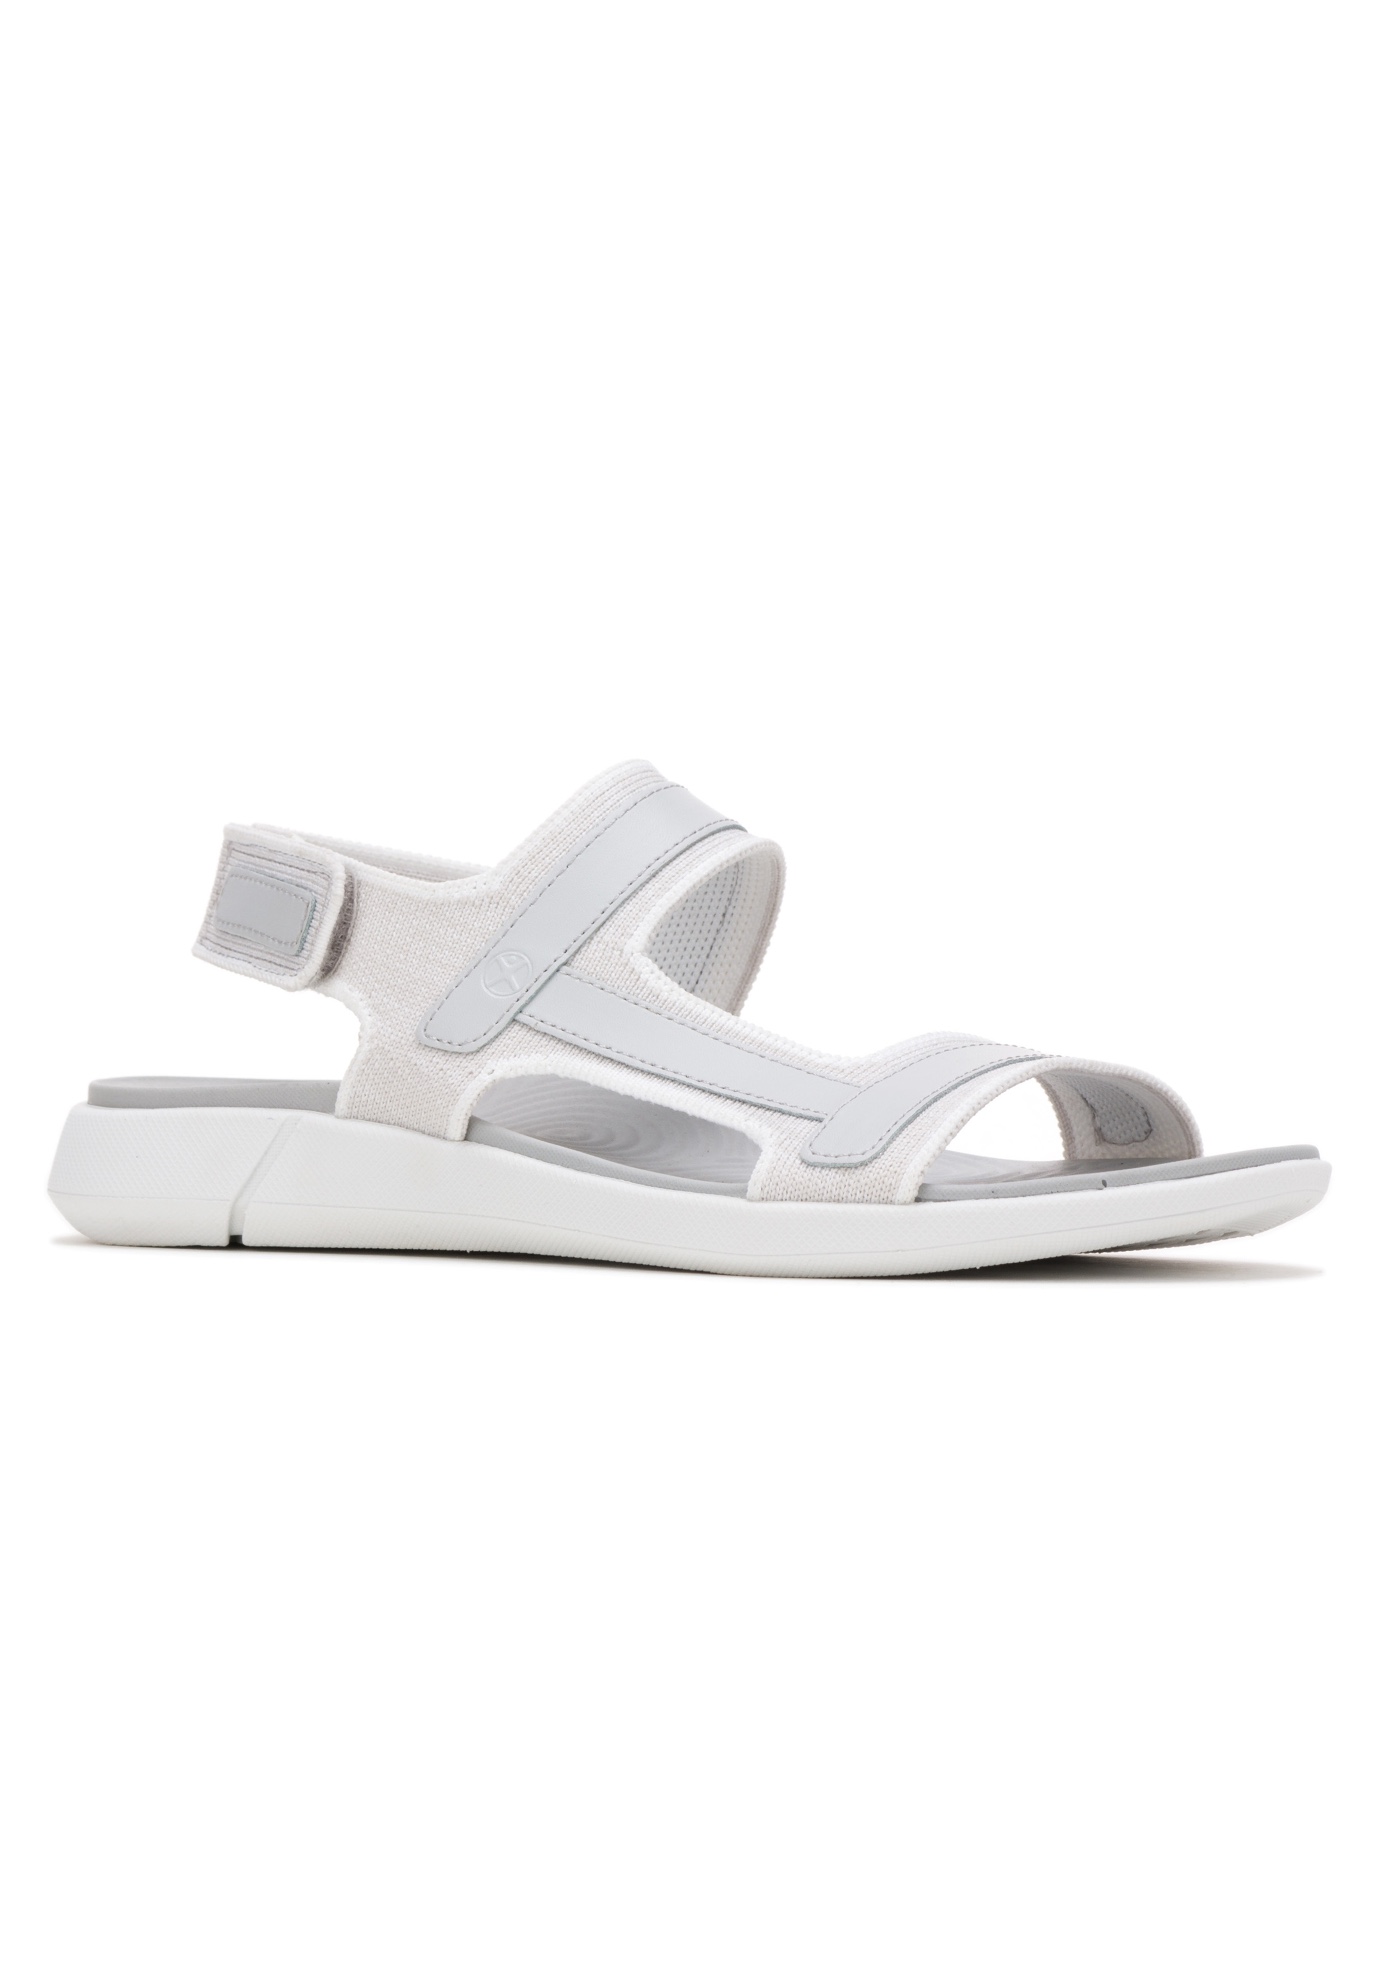 rafter sandals